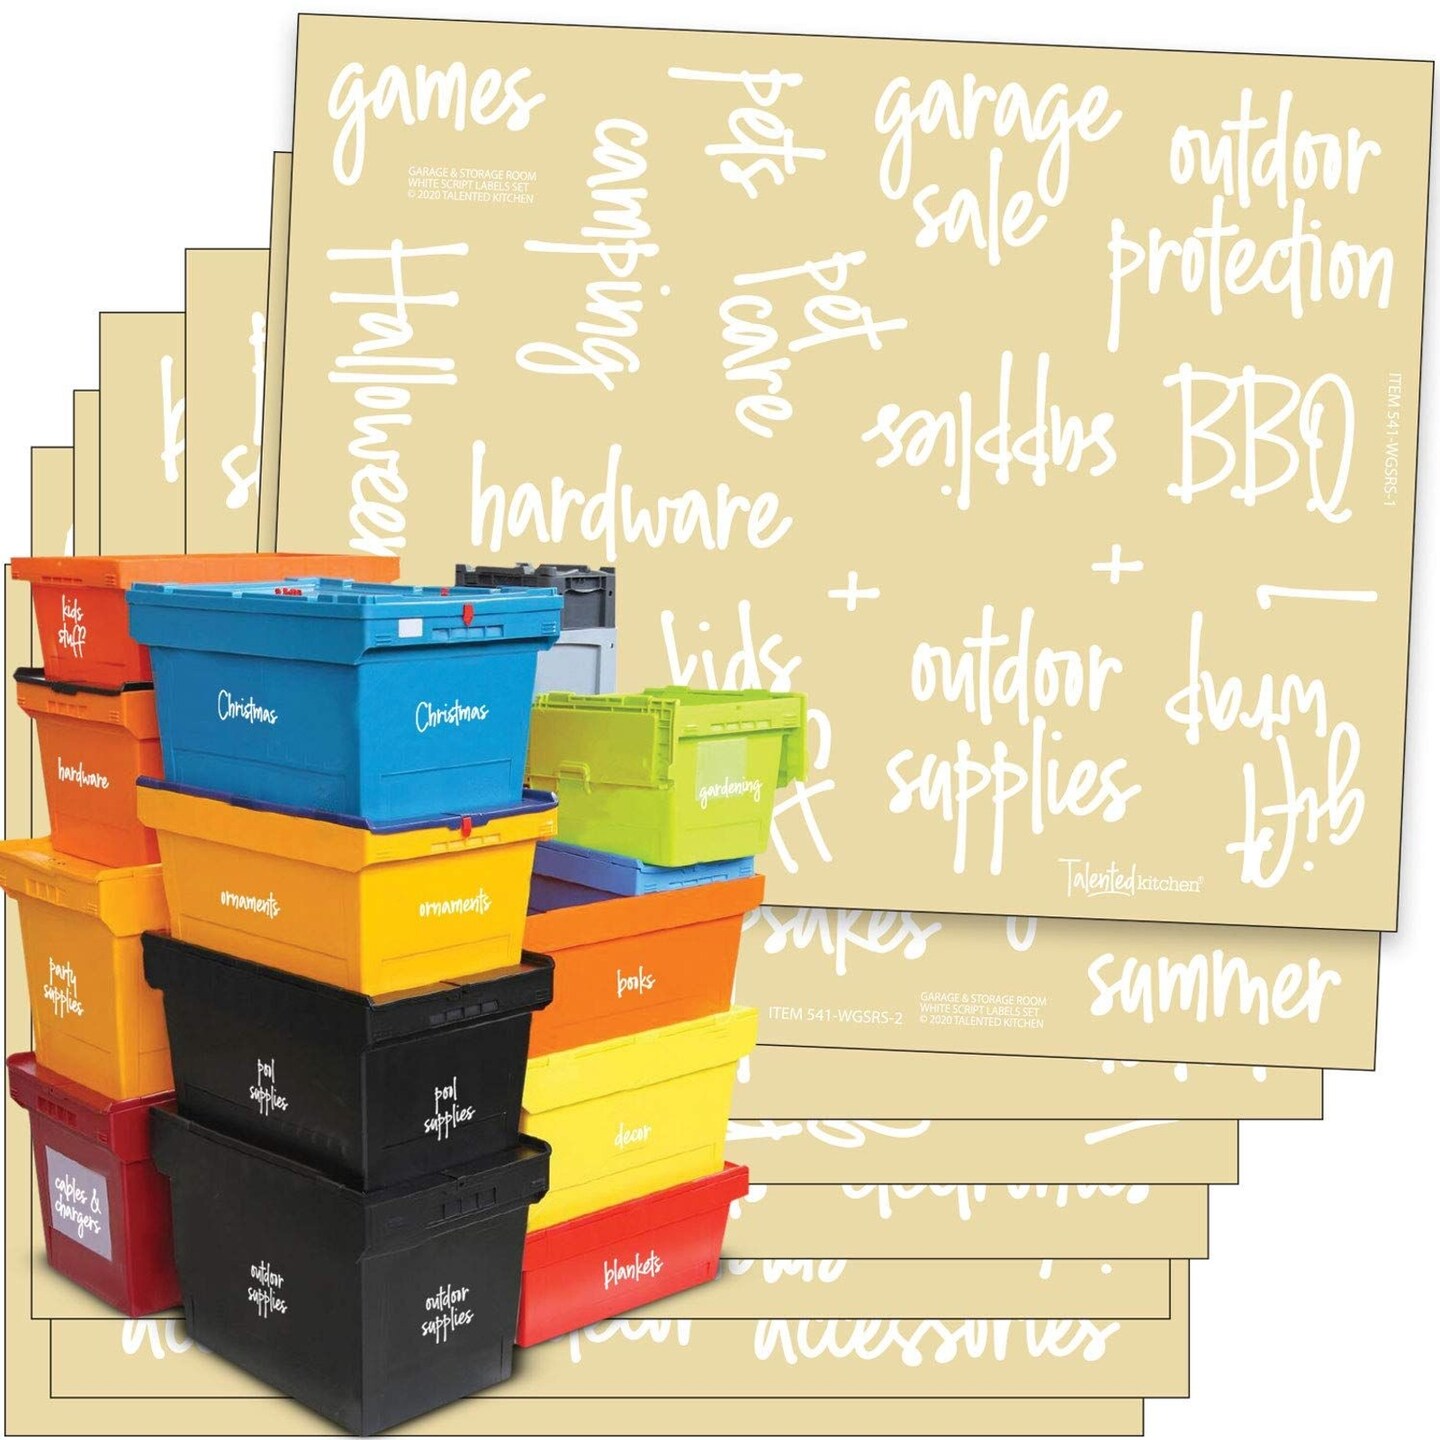 Talented Kitchen 136 Storage Room &#x26; Garage Organization Labels for Plastic Containers, Preprinted White Script on Clear Stickers for Organizing Bins and Boxes (Water Resistant)